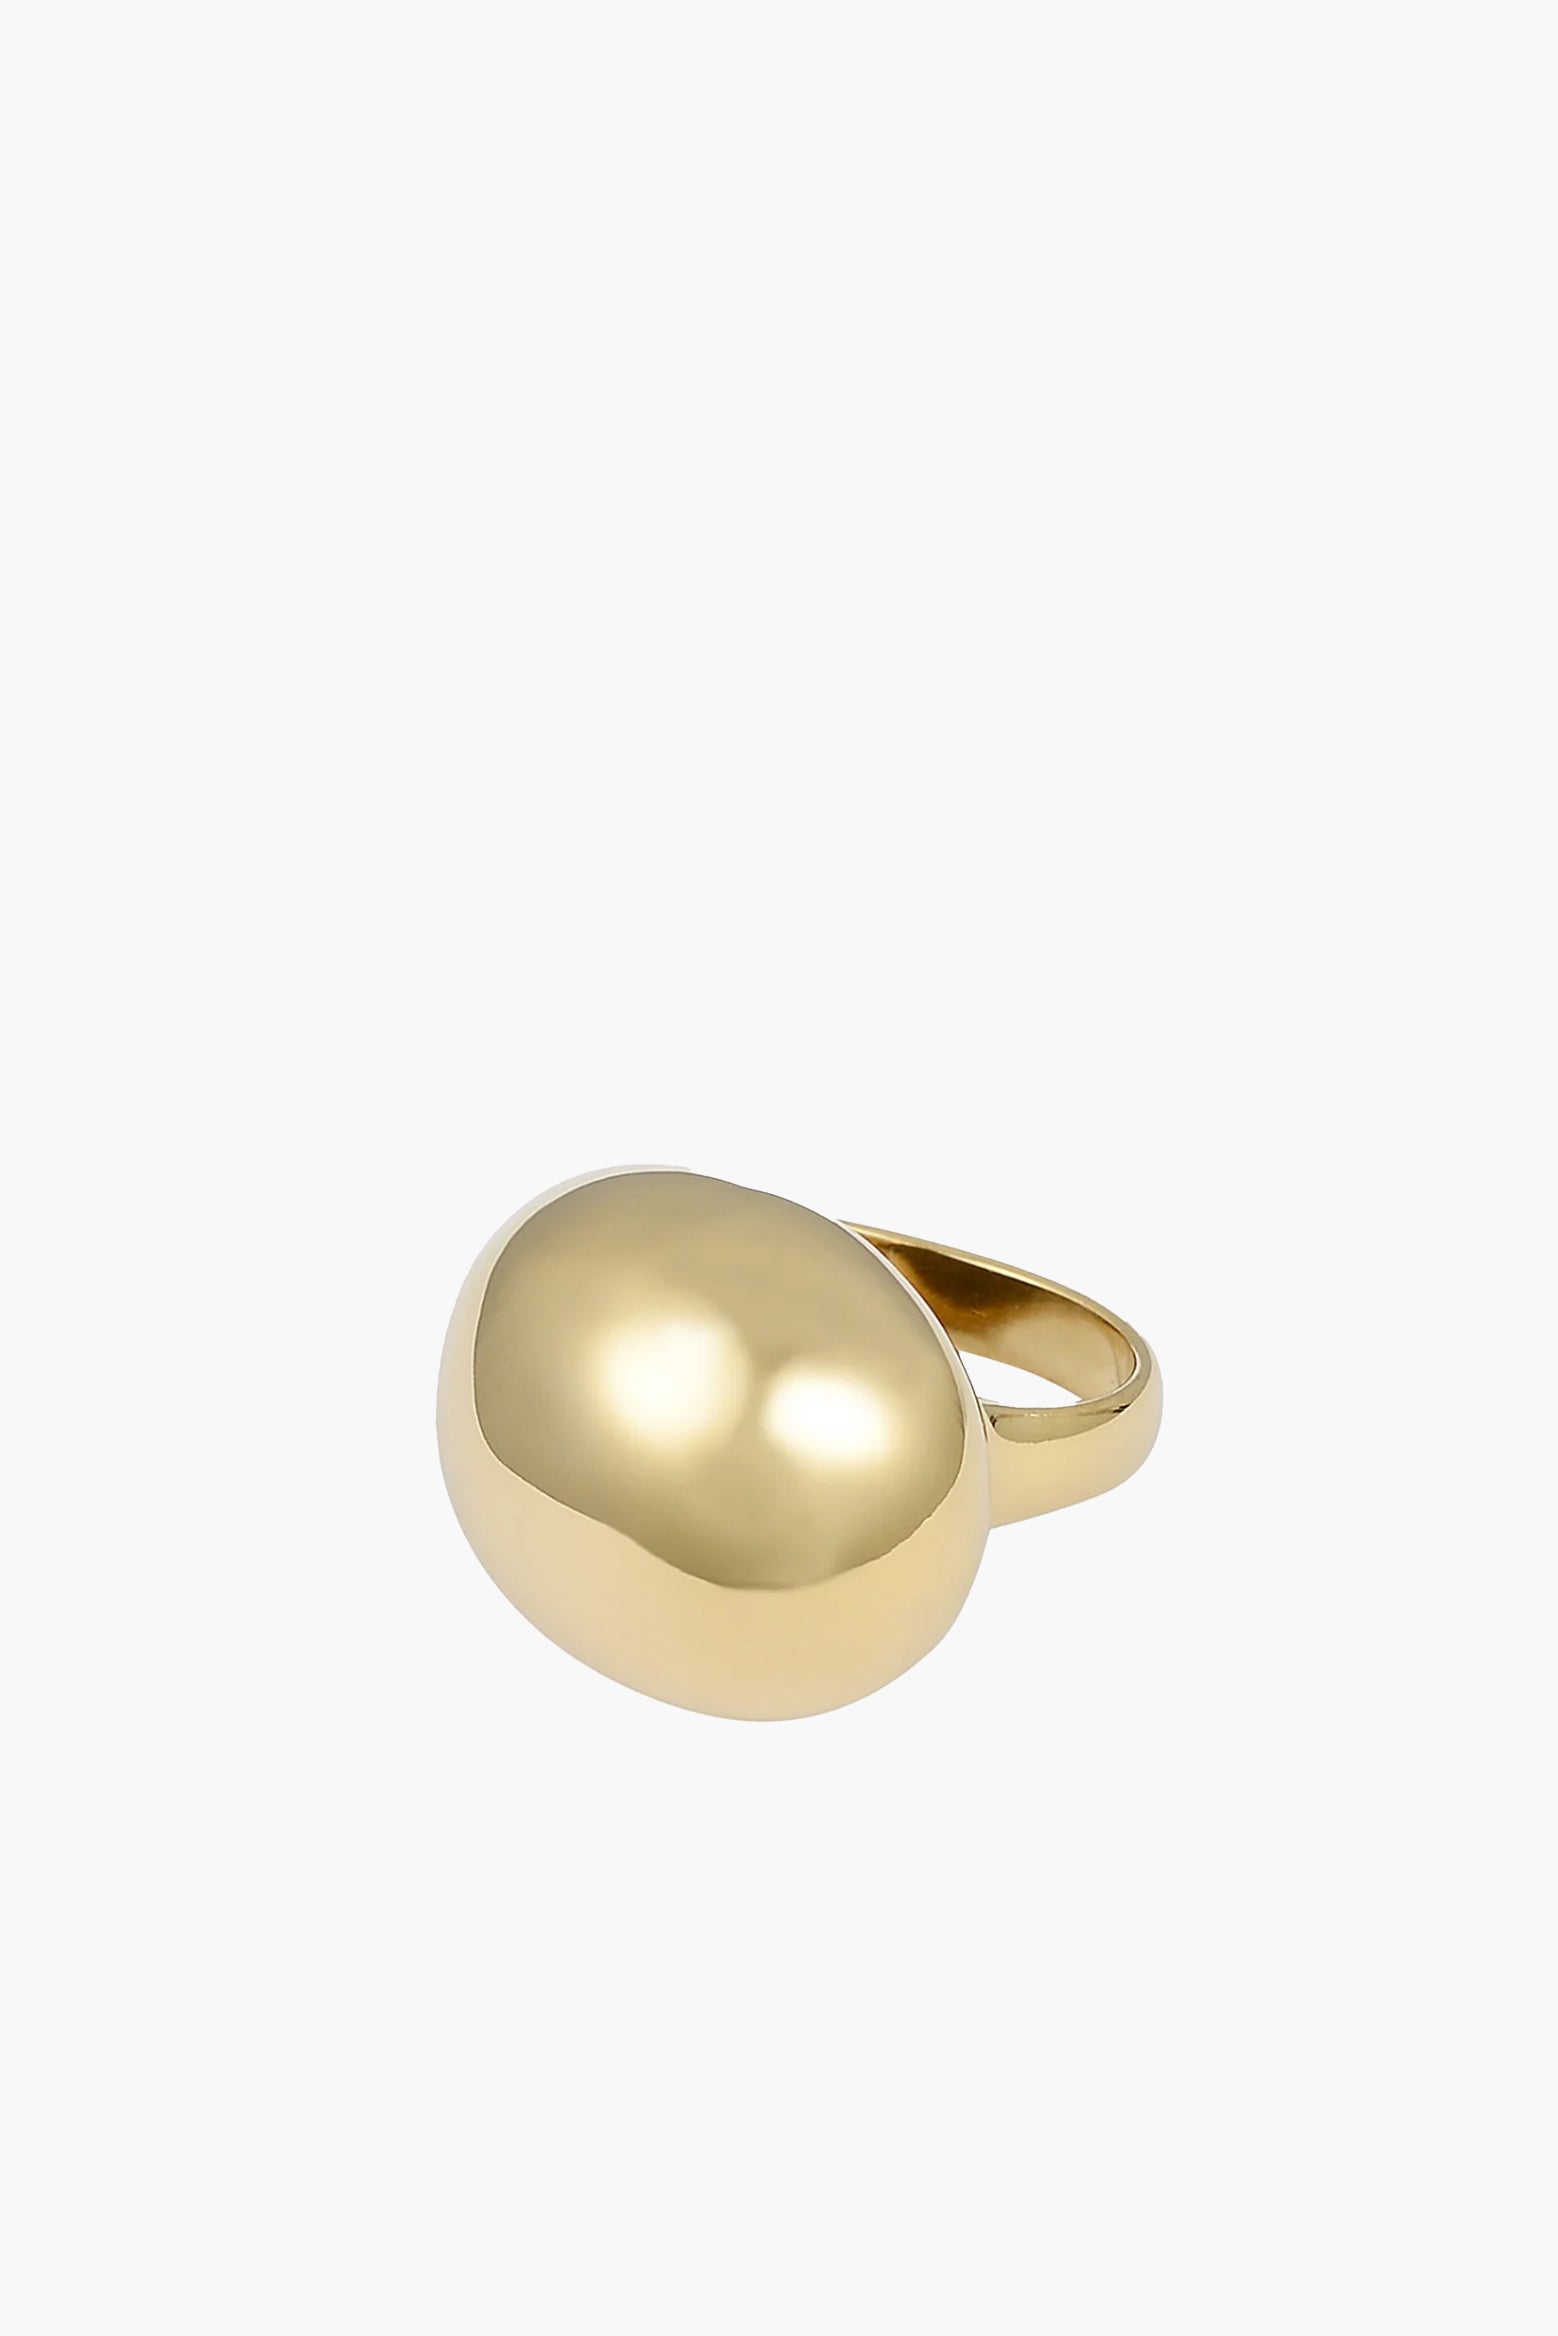 Anna Rossi Dome Ring in Gold available at The New Trend Australia. 